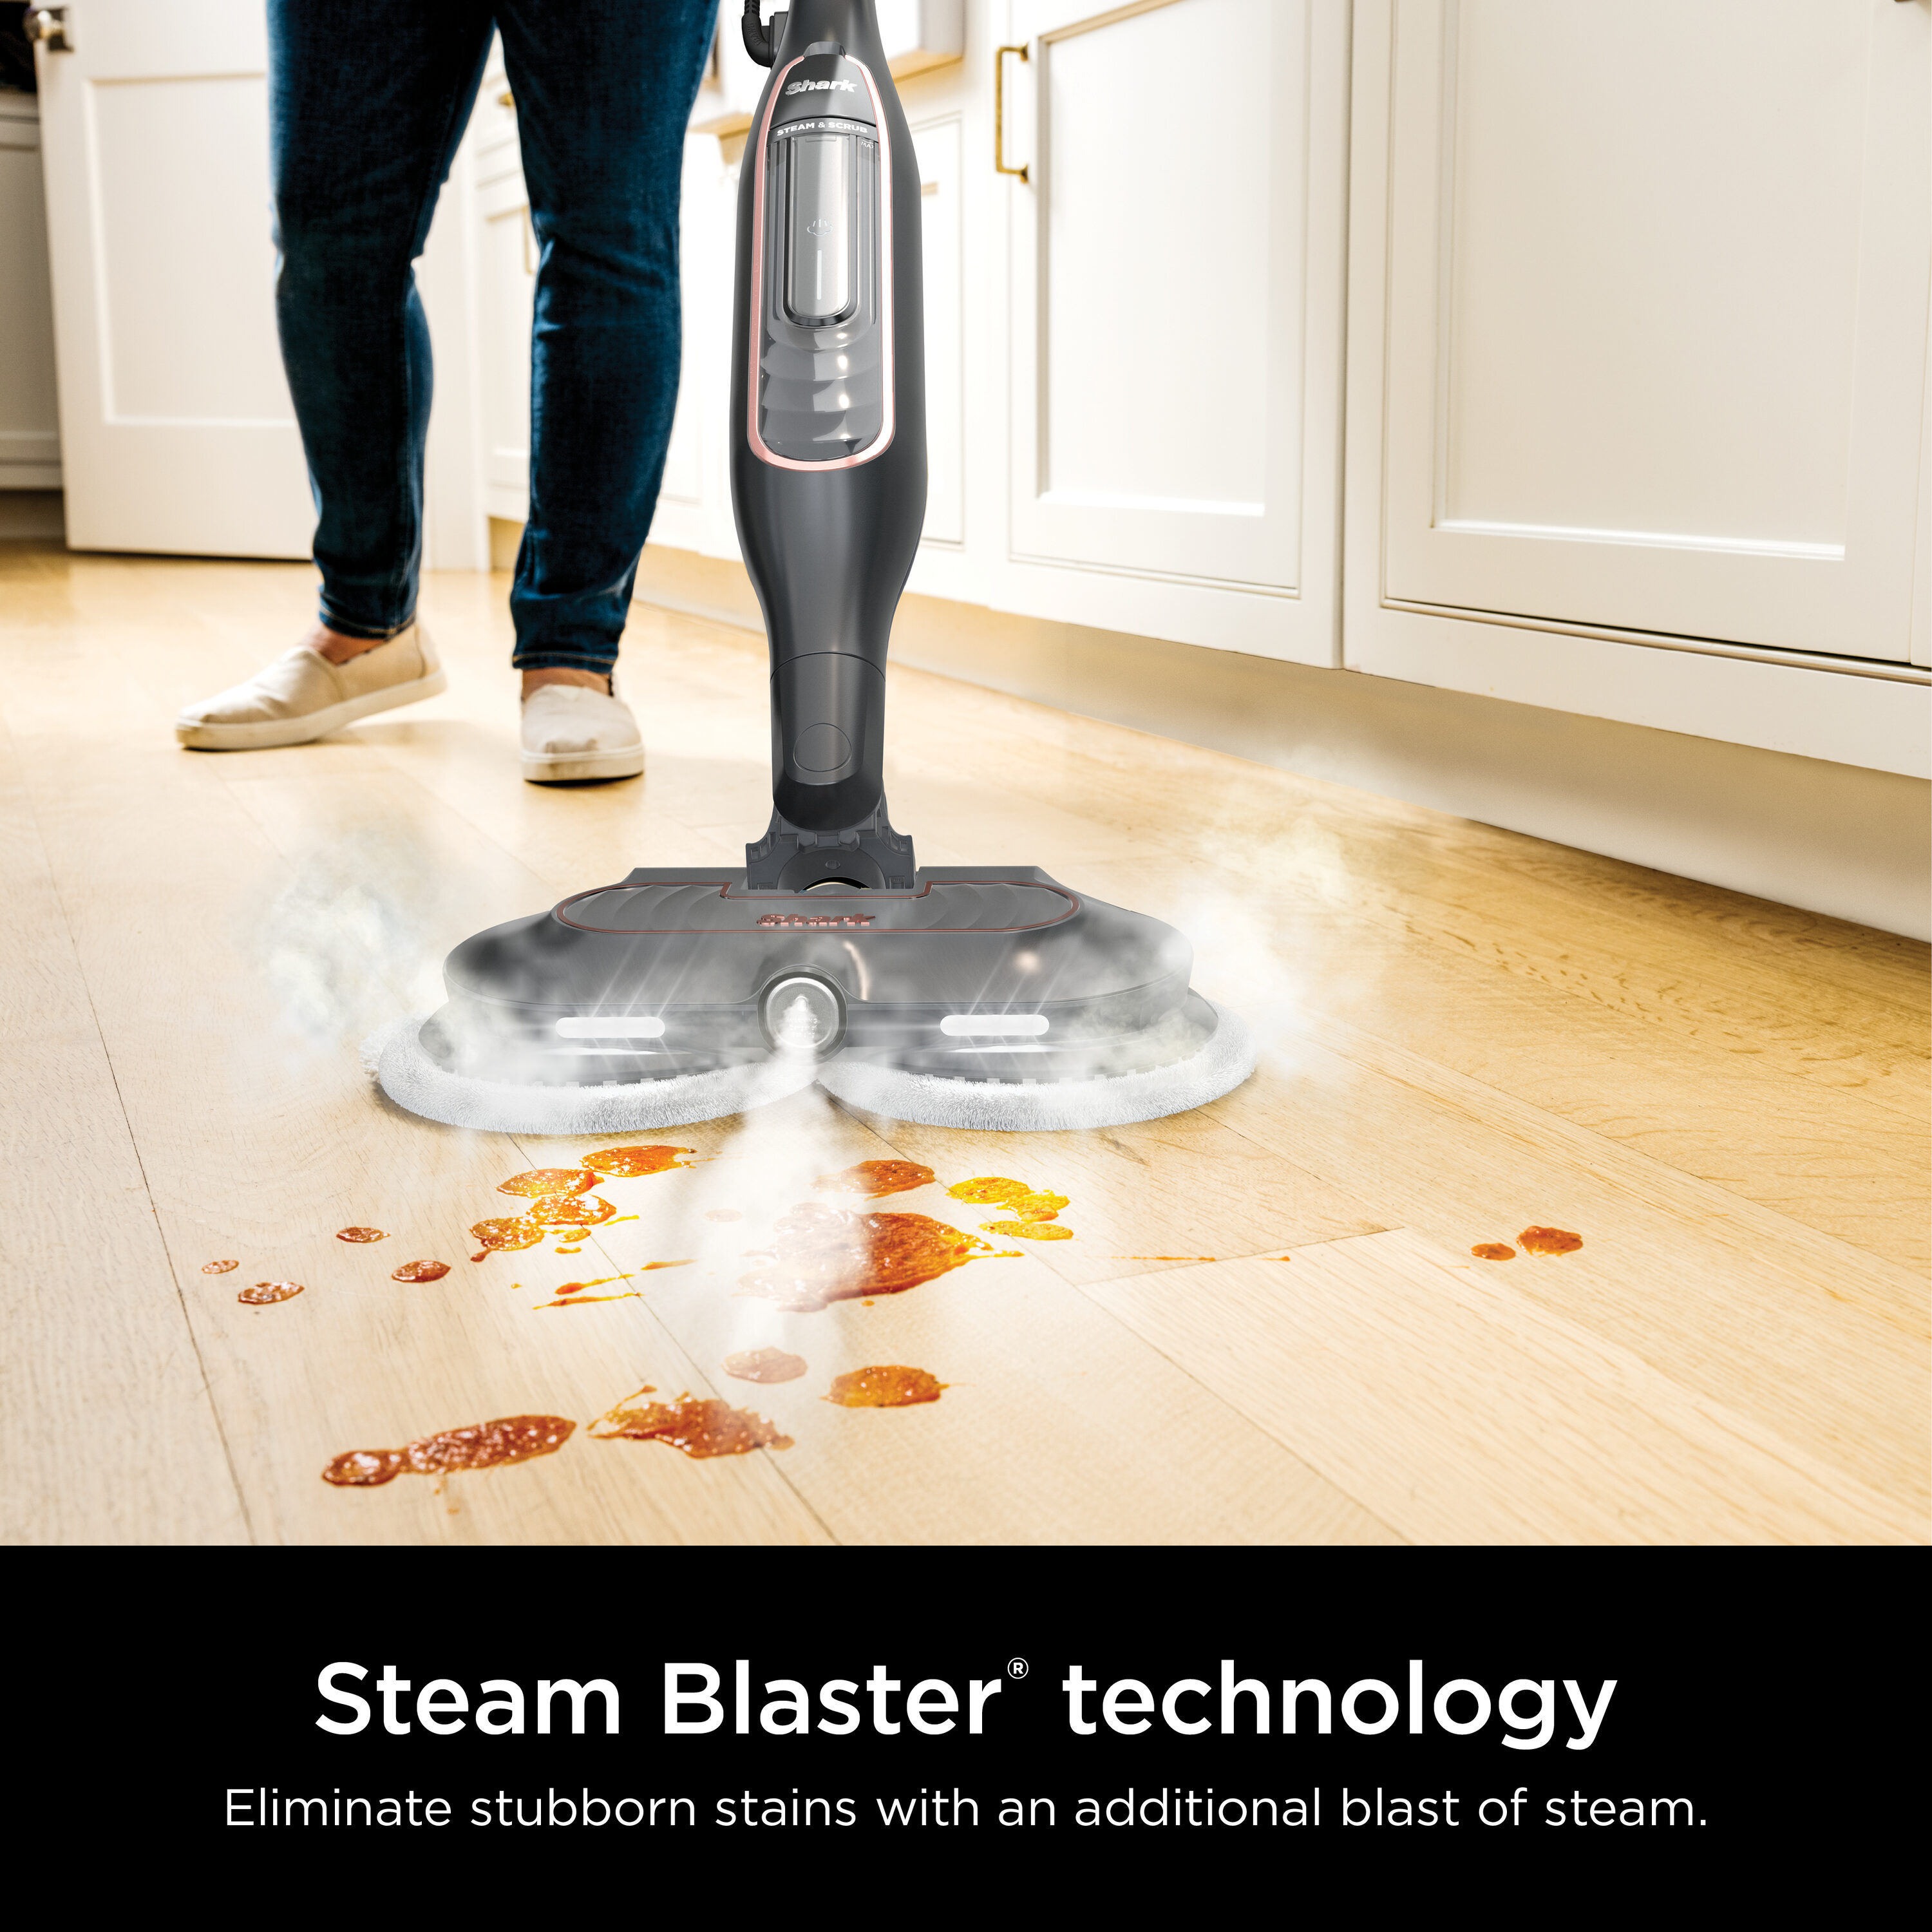 Shark Steam and Scrub Mop review